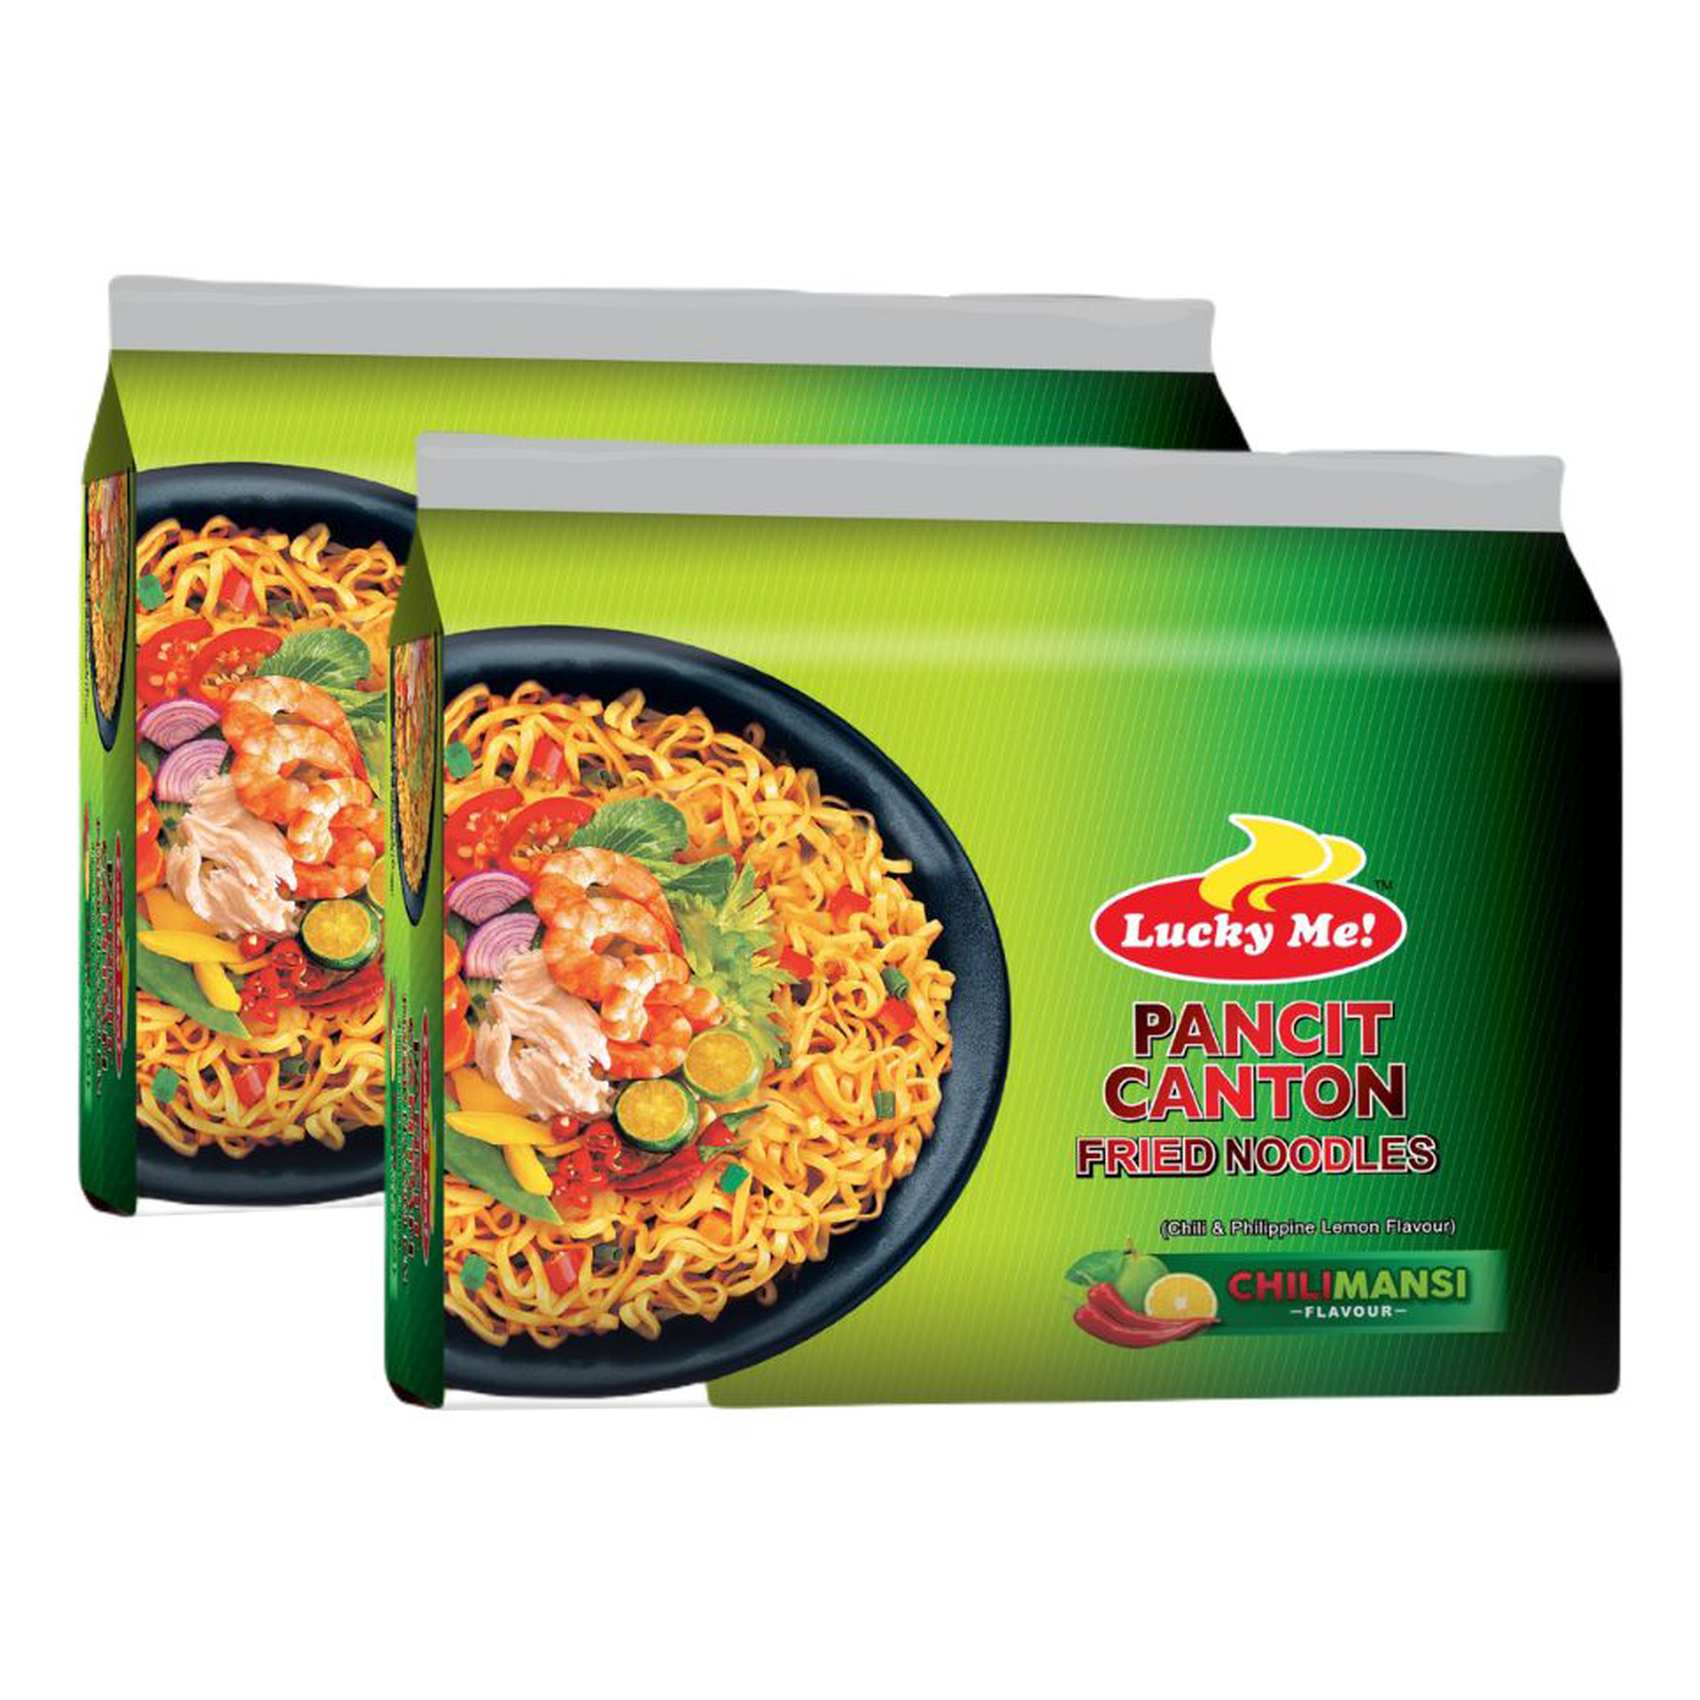 Lucky Me! Pancit Canton Fried Noodles Chilimansi Flavour 6 Noodles 60g Pack of 2